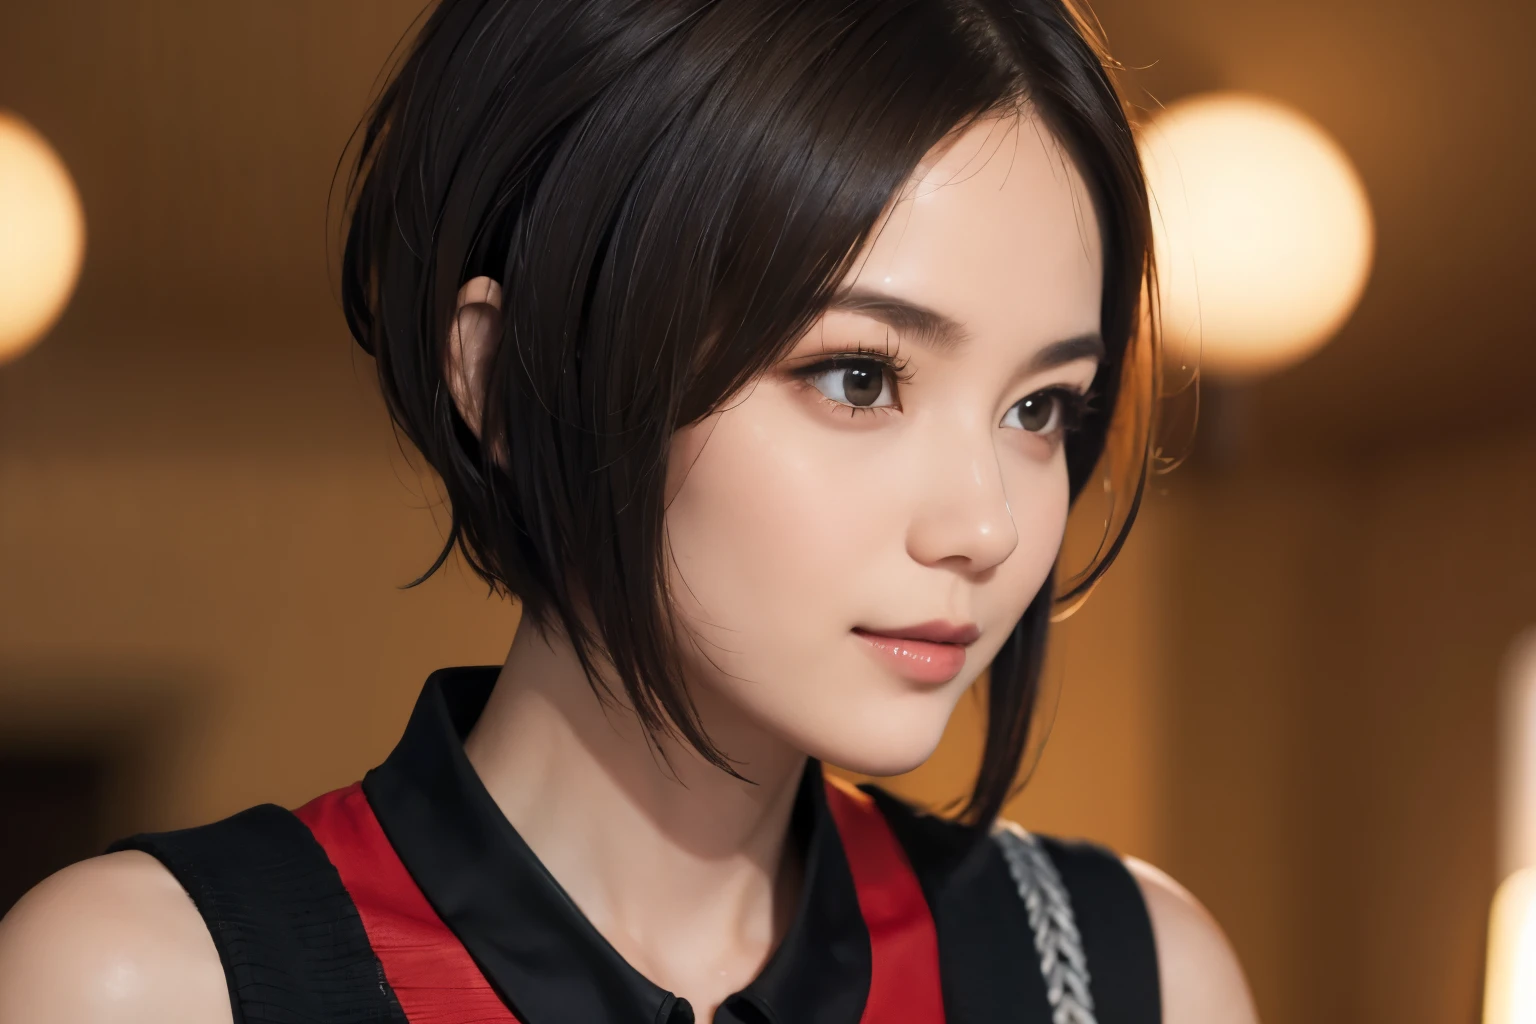 143
(20 year old woman), (surreal), (High level image quality), ((beautiful hairstyle 46)), ((short hair:1.46)), (gentle smile), (breasted:1.1), (lipstick)